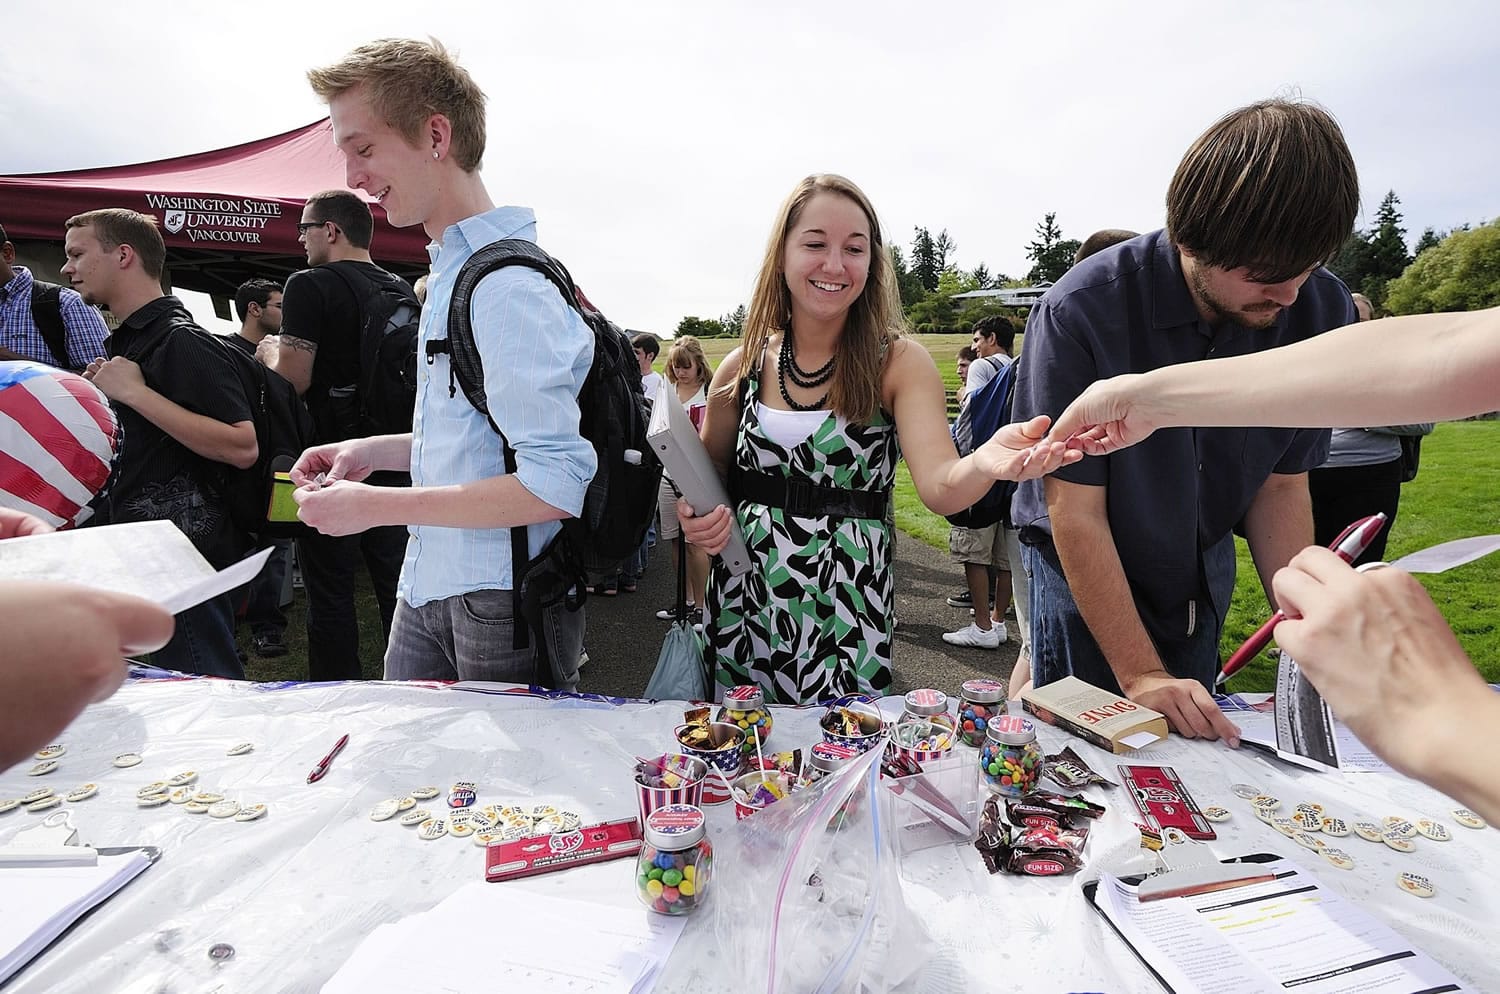 Washington State University Vancouver students Mackenzie Spray, 20, from left, Stephanie Wiese, 19, and Jon Elias, 20, register to vote and sign pledge cards at a voter pledge drive Thursday on the WSUV campus.